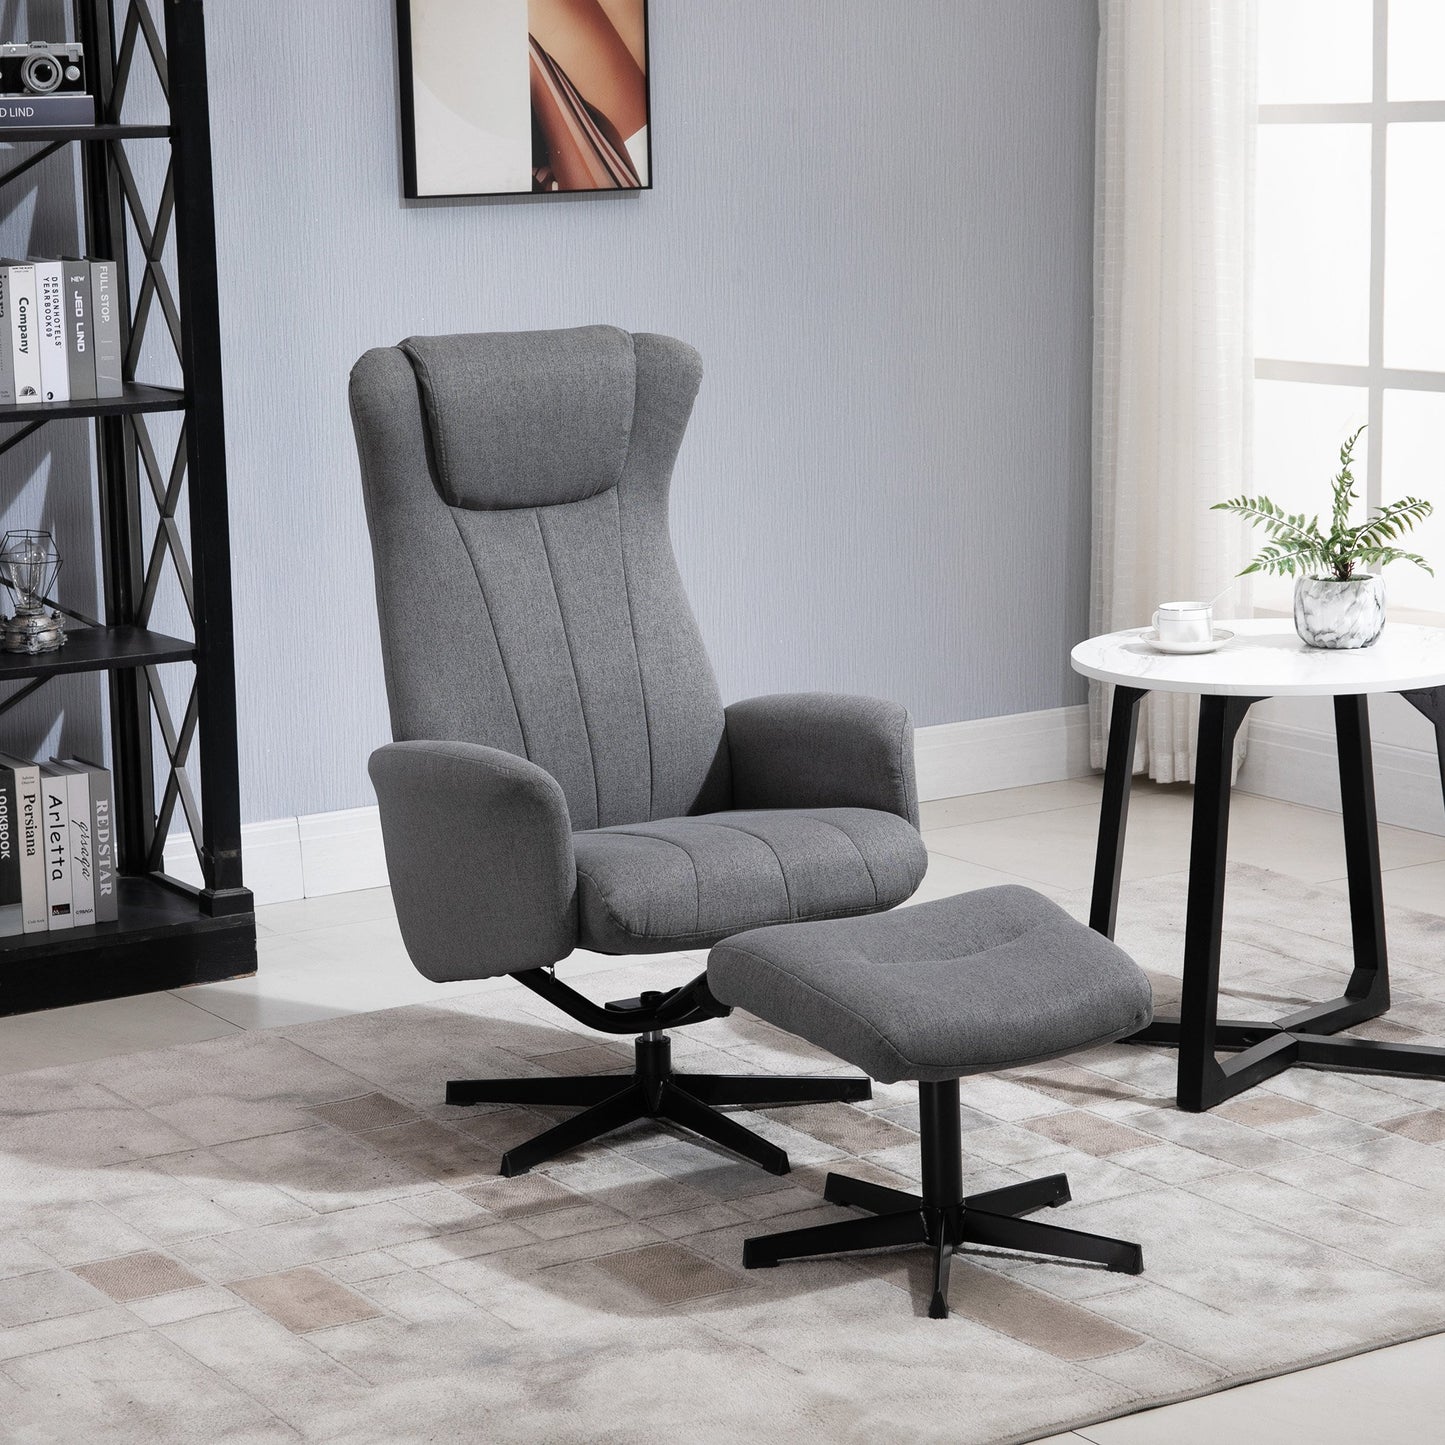 HOMCOM Recliner and Ottoman with 135° Adjustable Backrest for Home Office Dark Grey